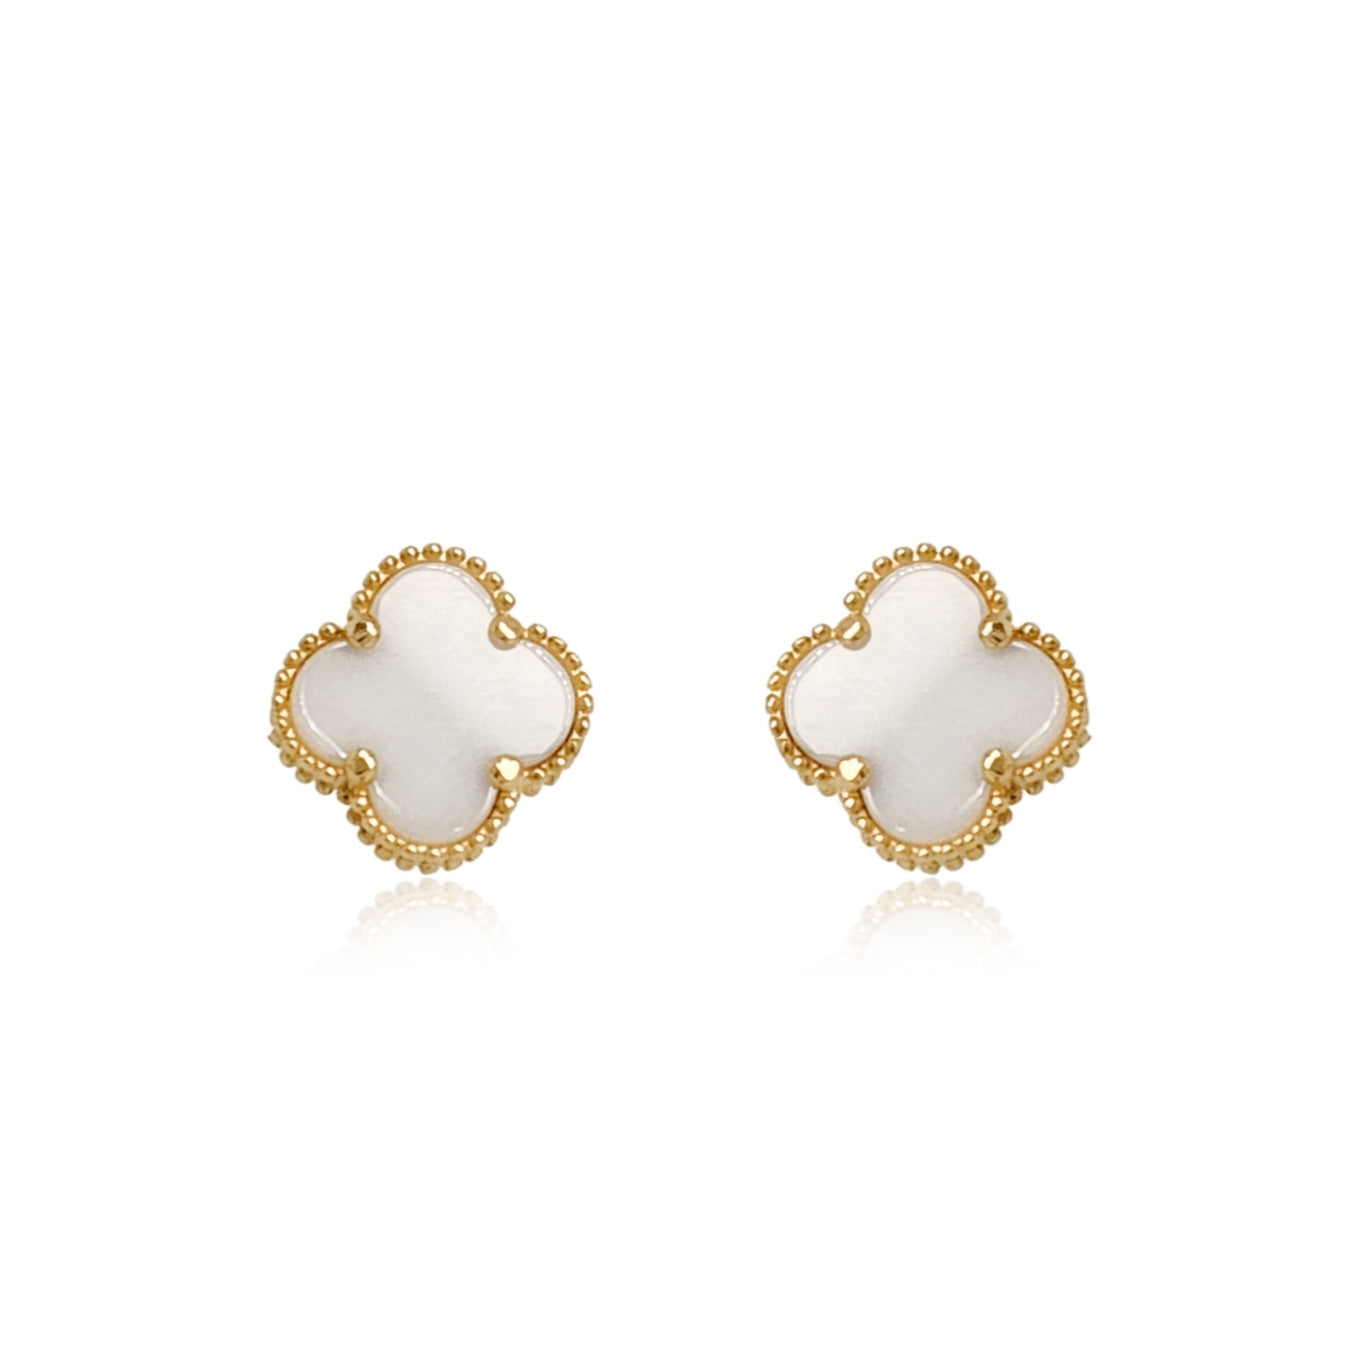 14k Gold Mother of Pearl Clover Stud Earrings